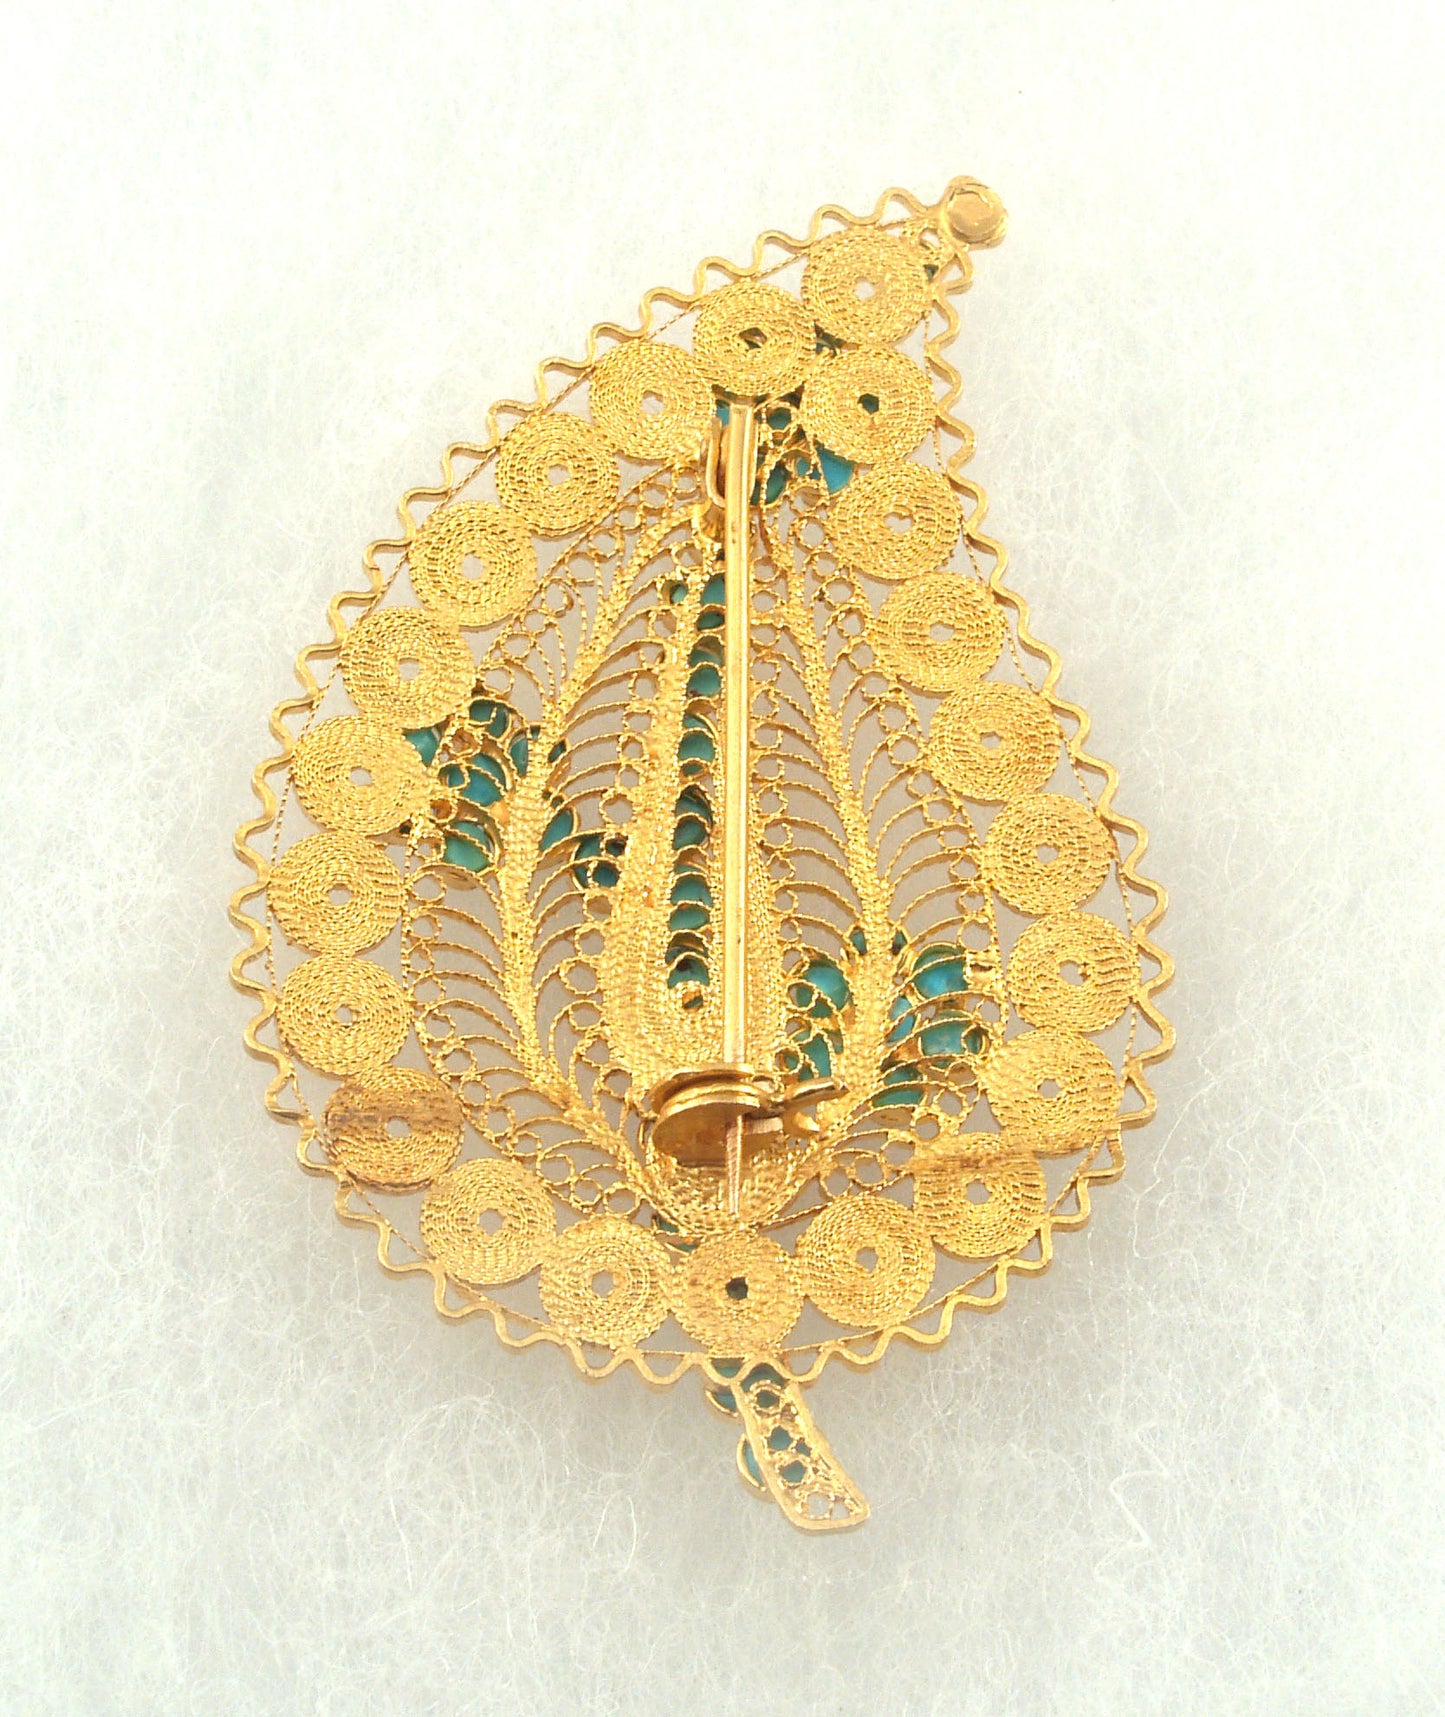 HE-Brooch solid high karat gold filigree and turquoise